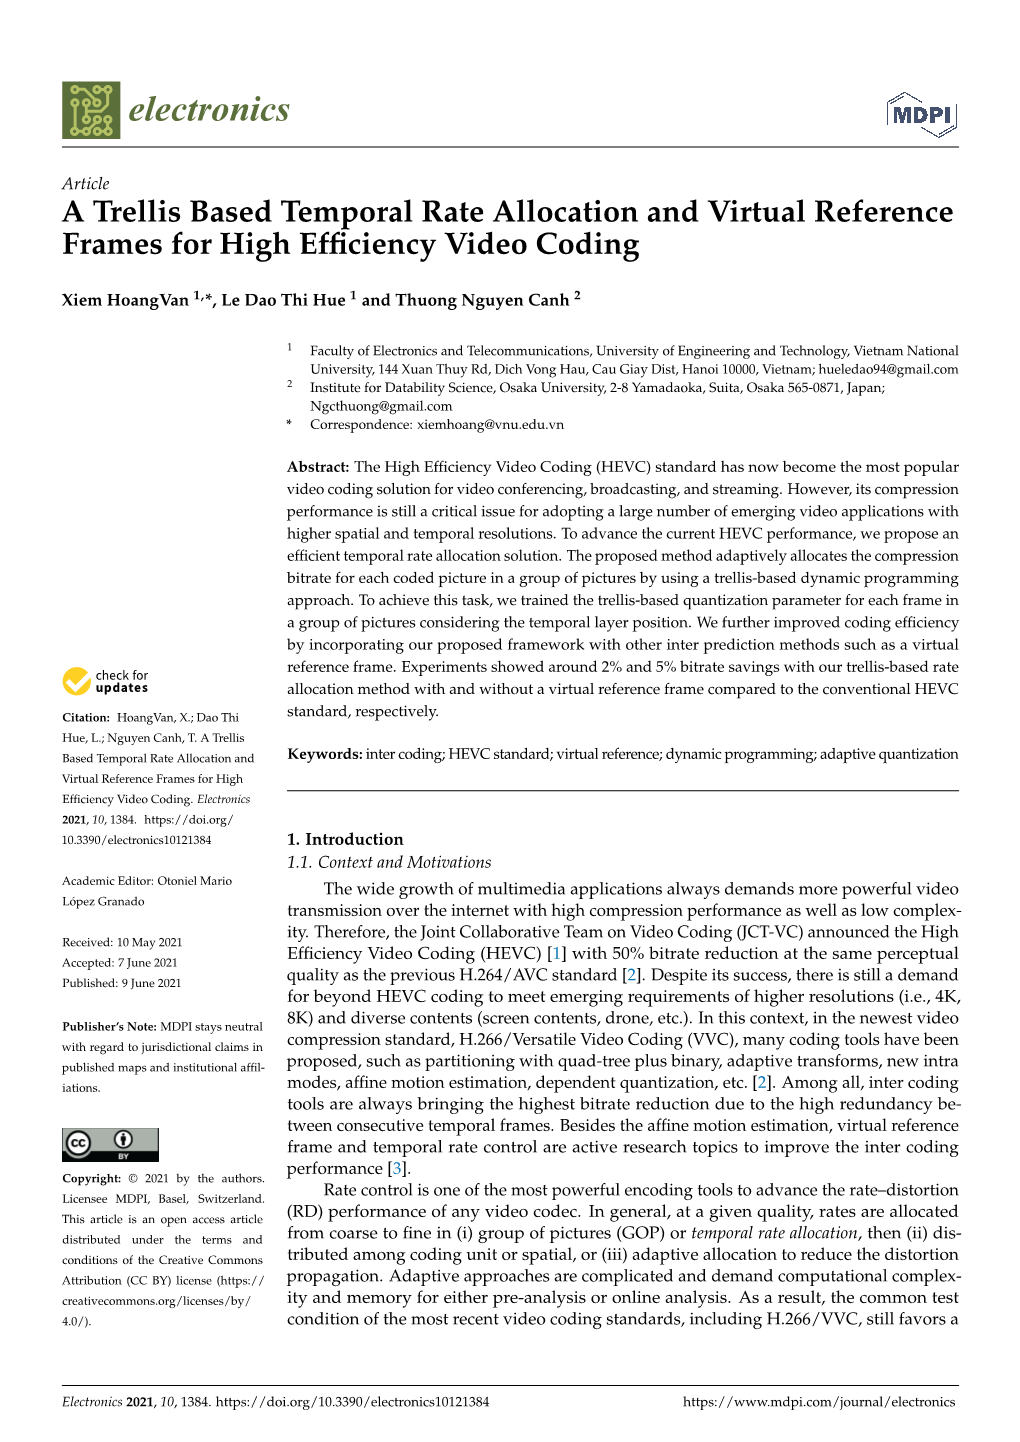 A Trellis Based Temporal Rate Allocation and Virtual Reference Frames for High Efﬁciency Video Coding